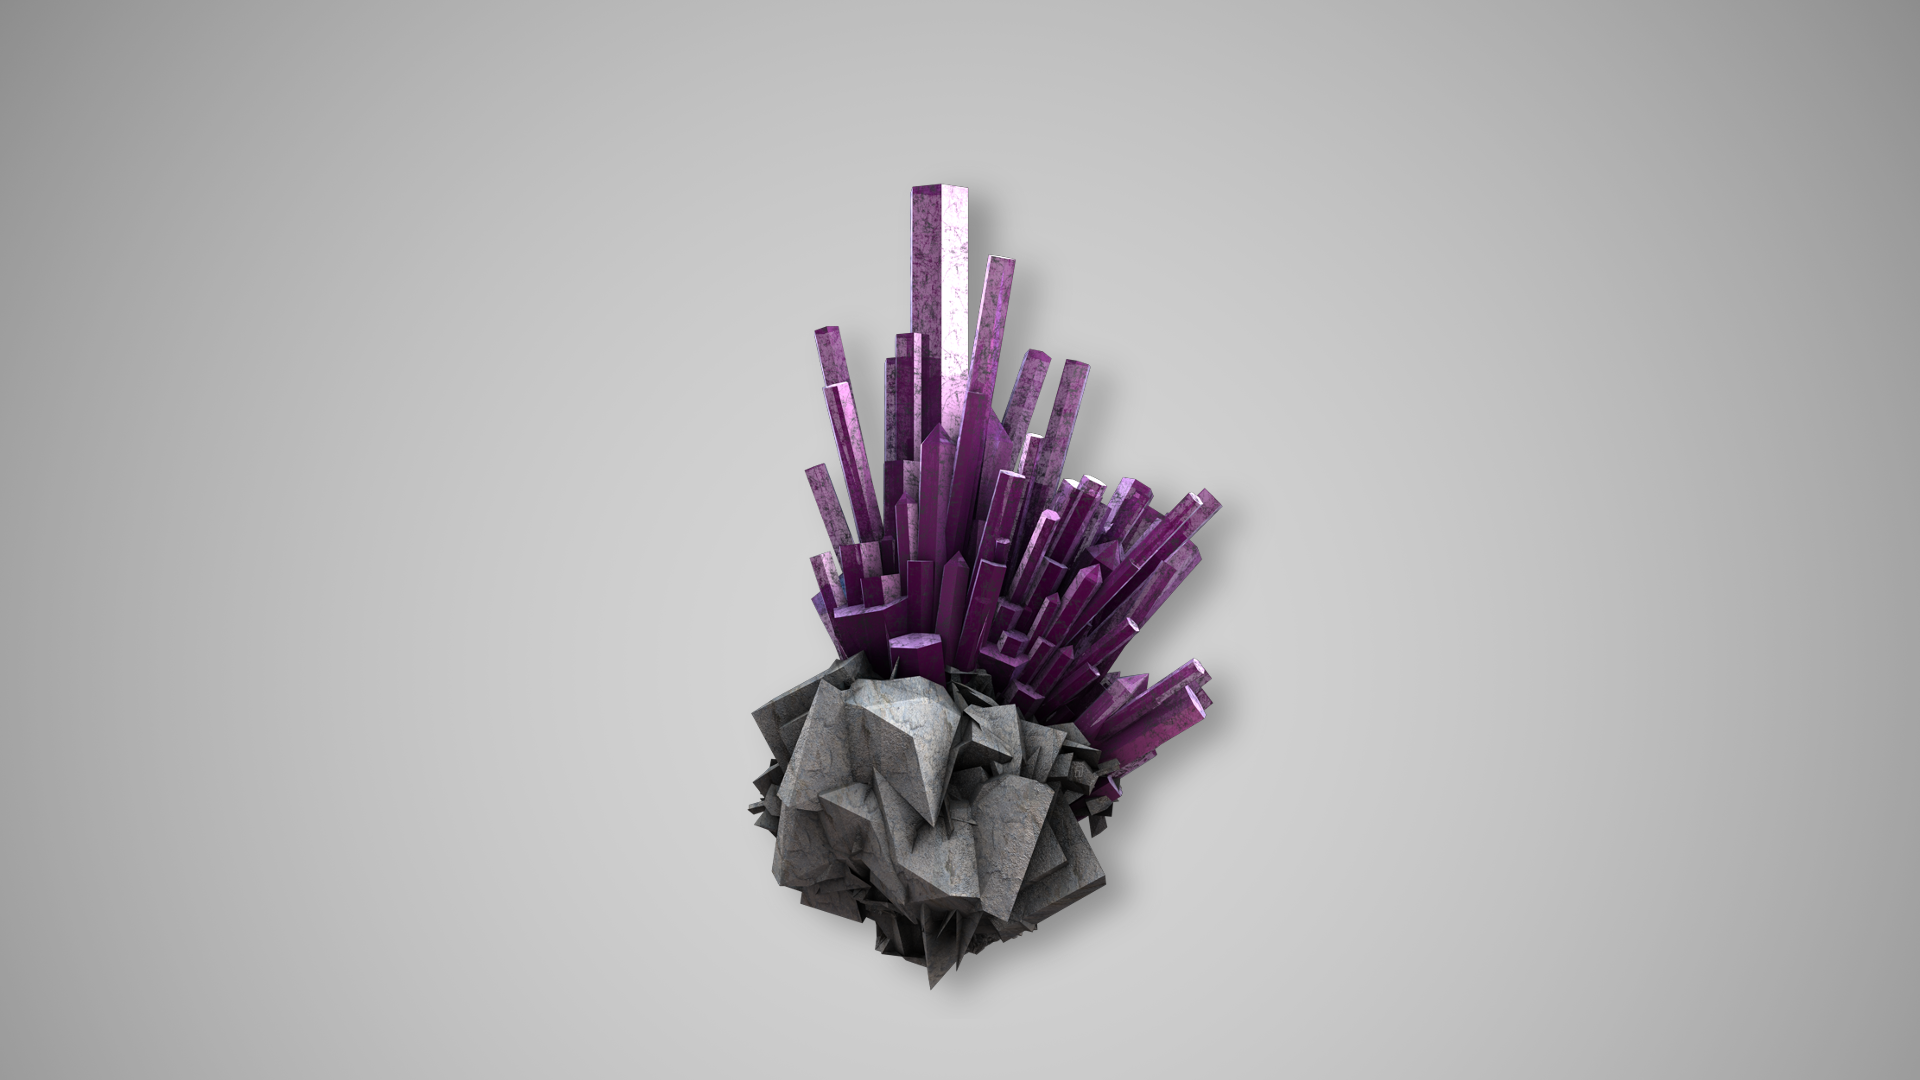 General 1920x1080 crystal crystal  purple DeviantArt gray background simple background abstract CGI